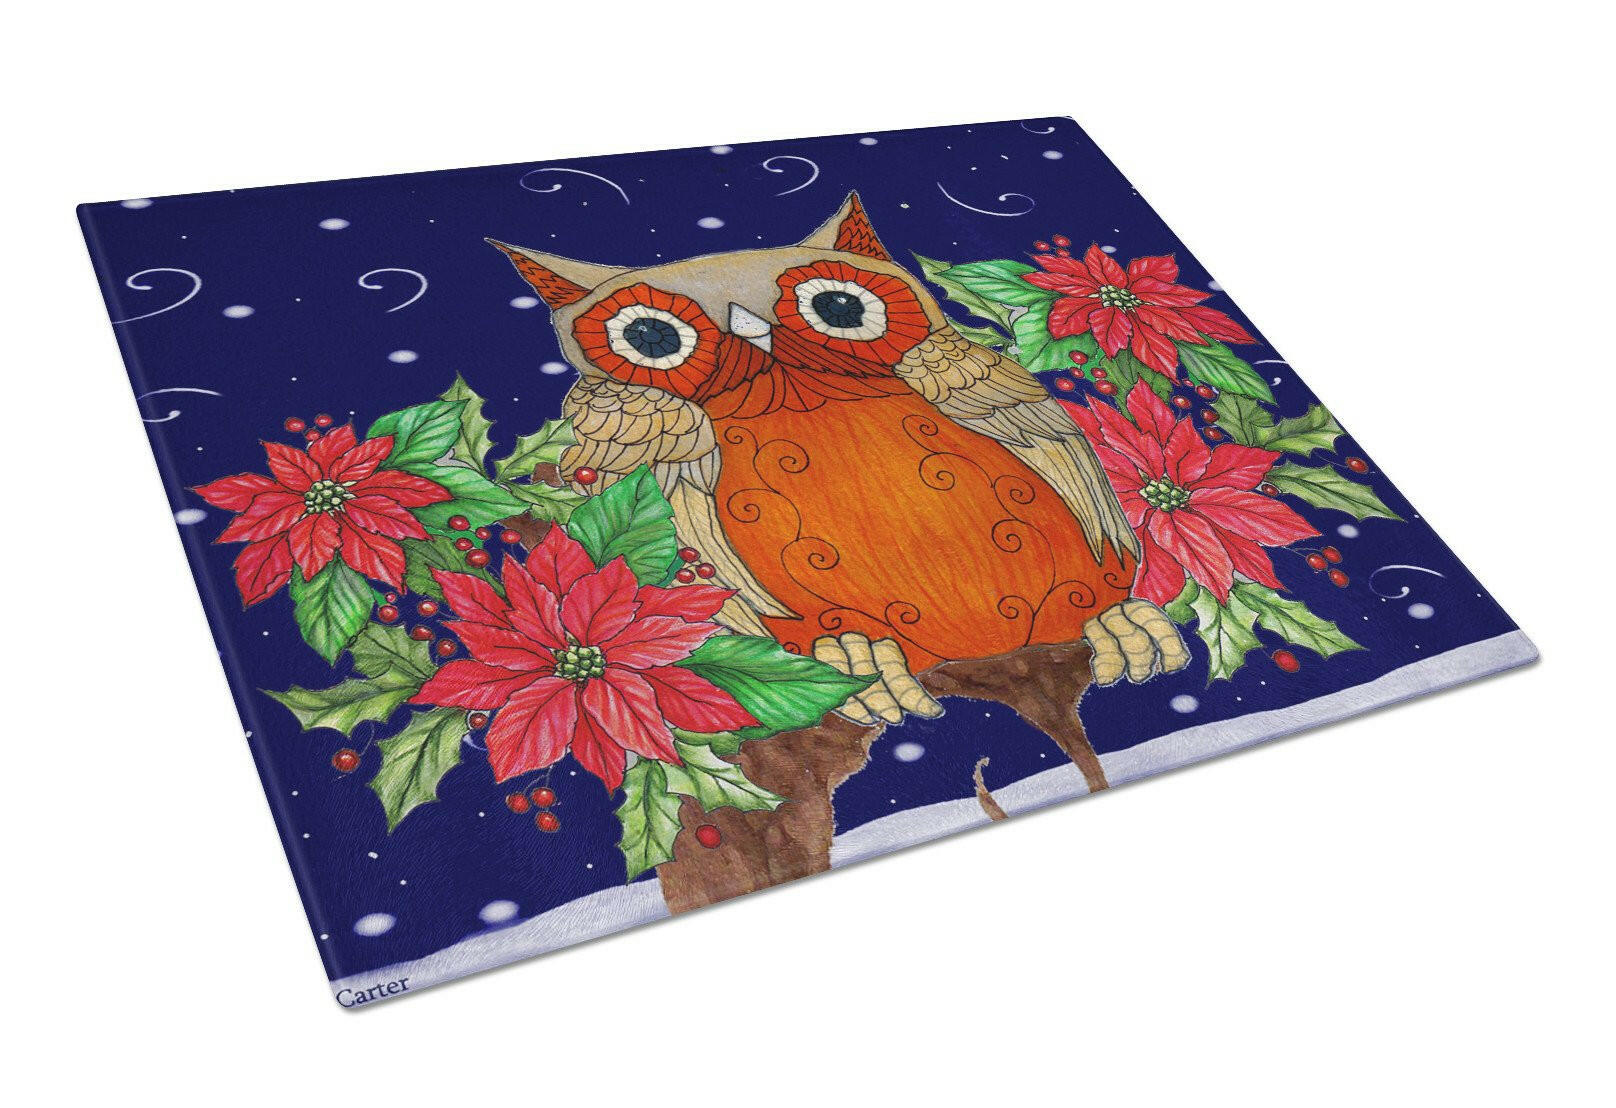 Whose Happy Holidays Owl Glass Cutting Board Large PJC1097LCB by Caroline's Treasures